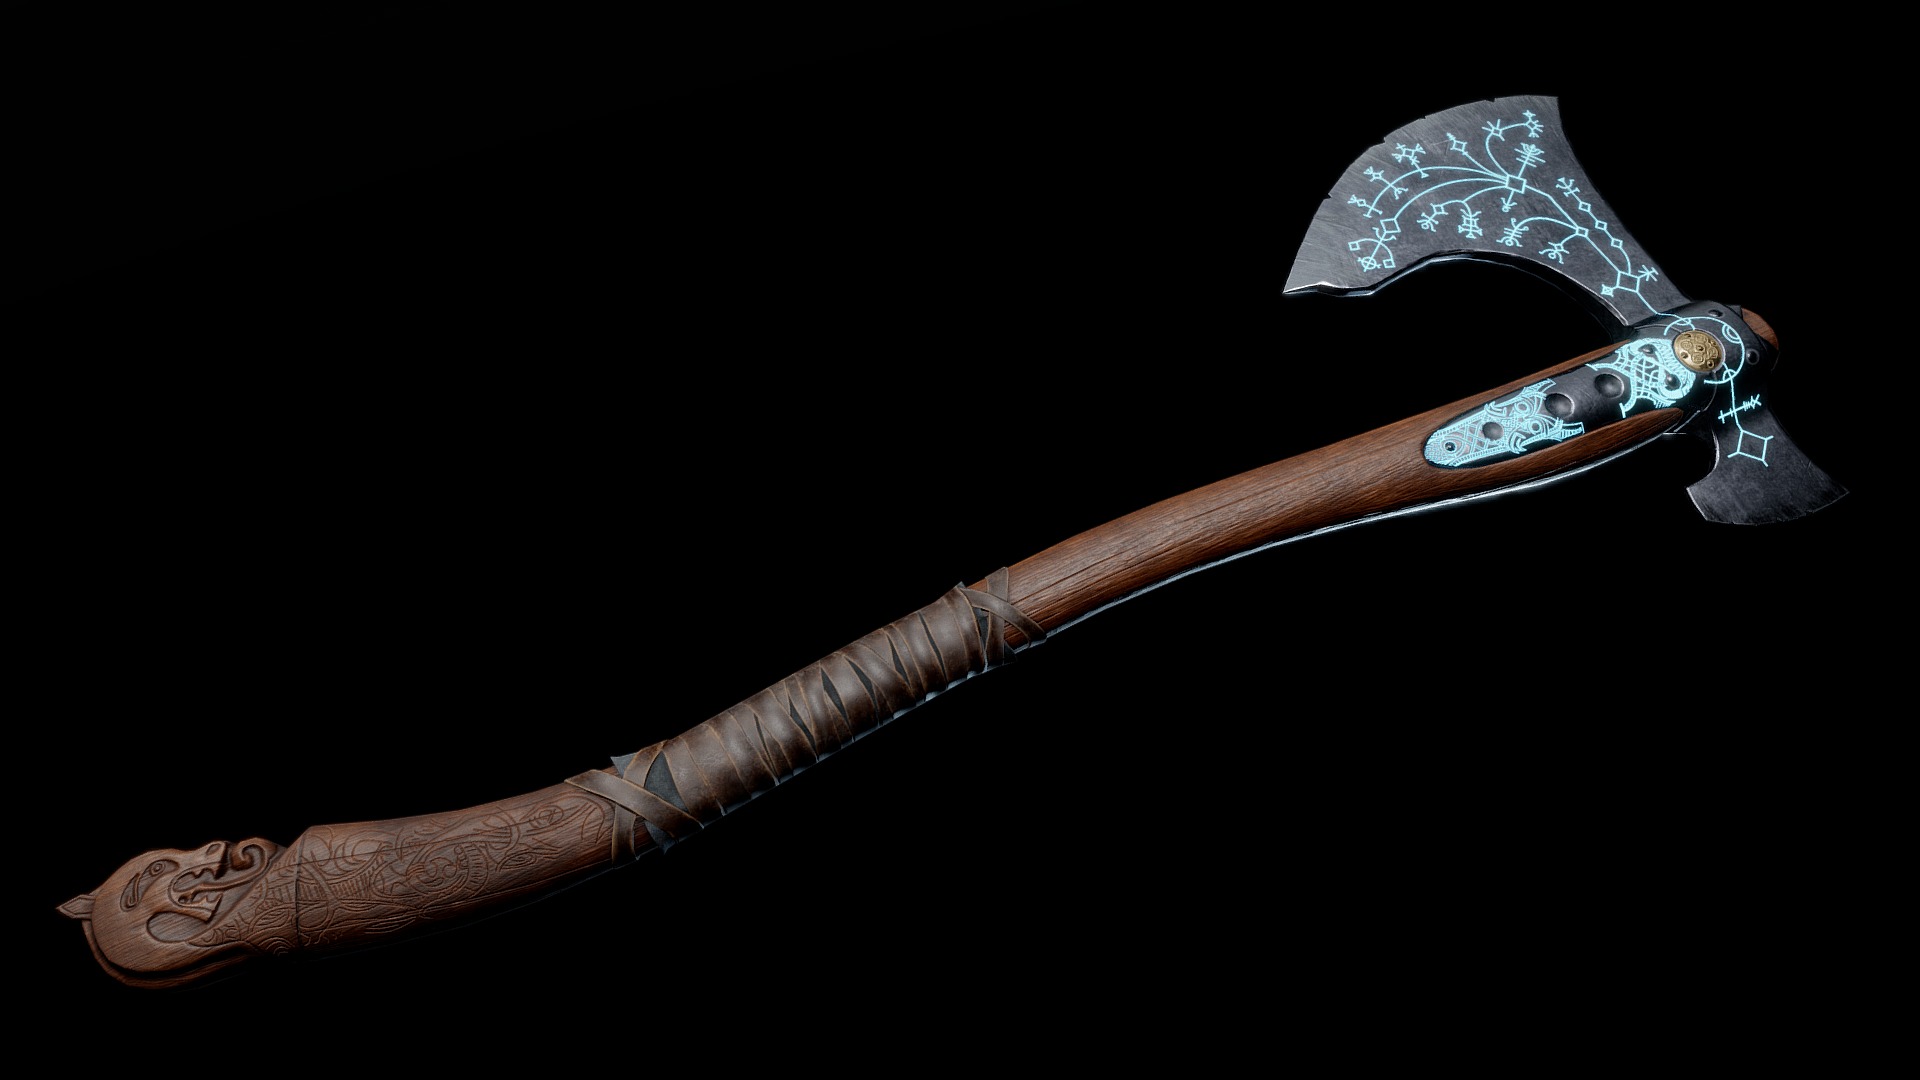 3D model Leviathan – God of war Fan art - This is a 3D model of the Leviathan - God of war Fan art. The 3D model is about a sword with a handle.